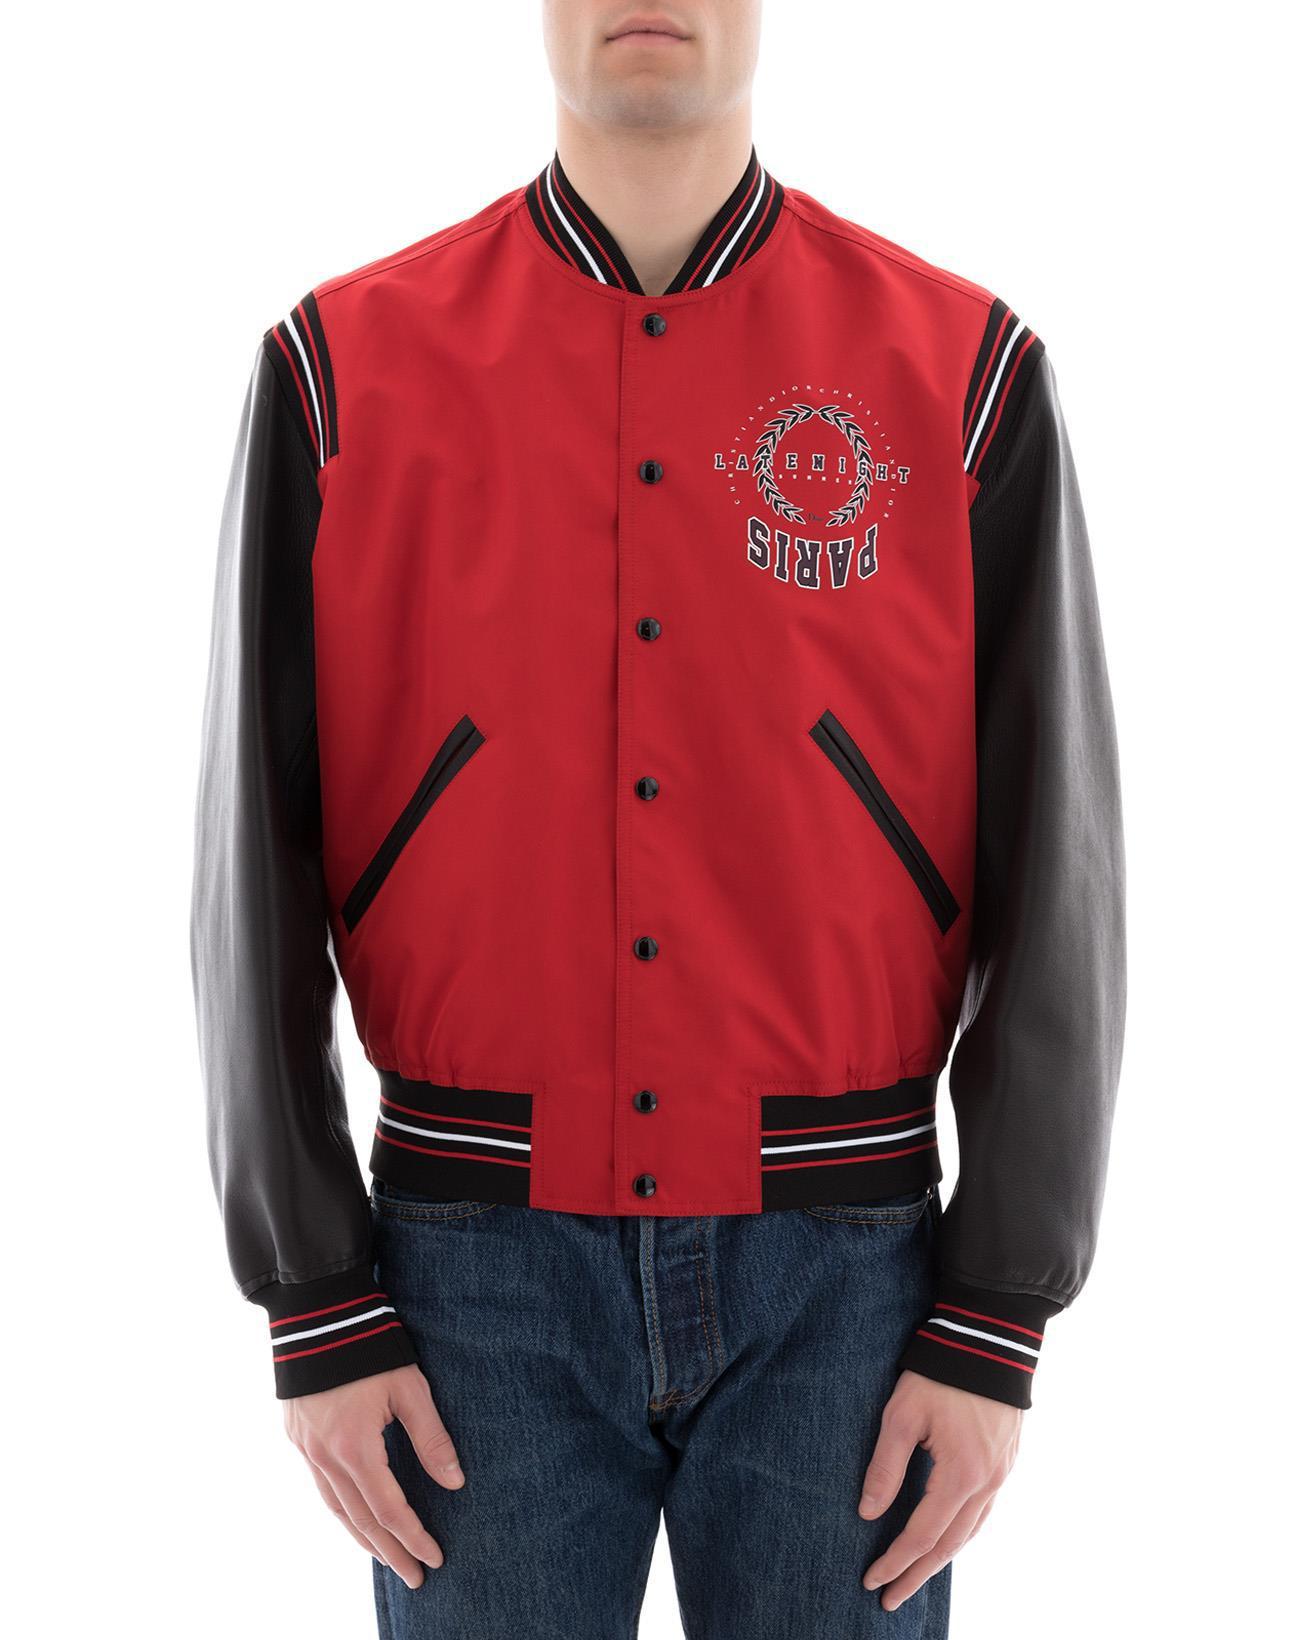 Dior Homme Synthetic Varsity Jacket in Red for Men - Lyst